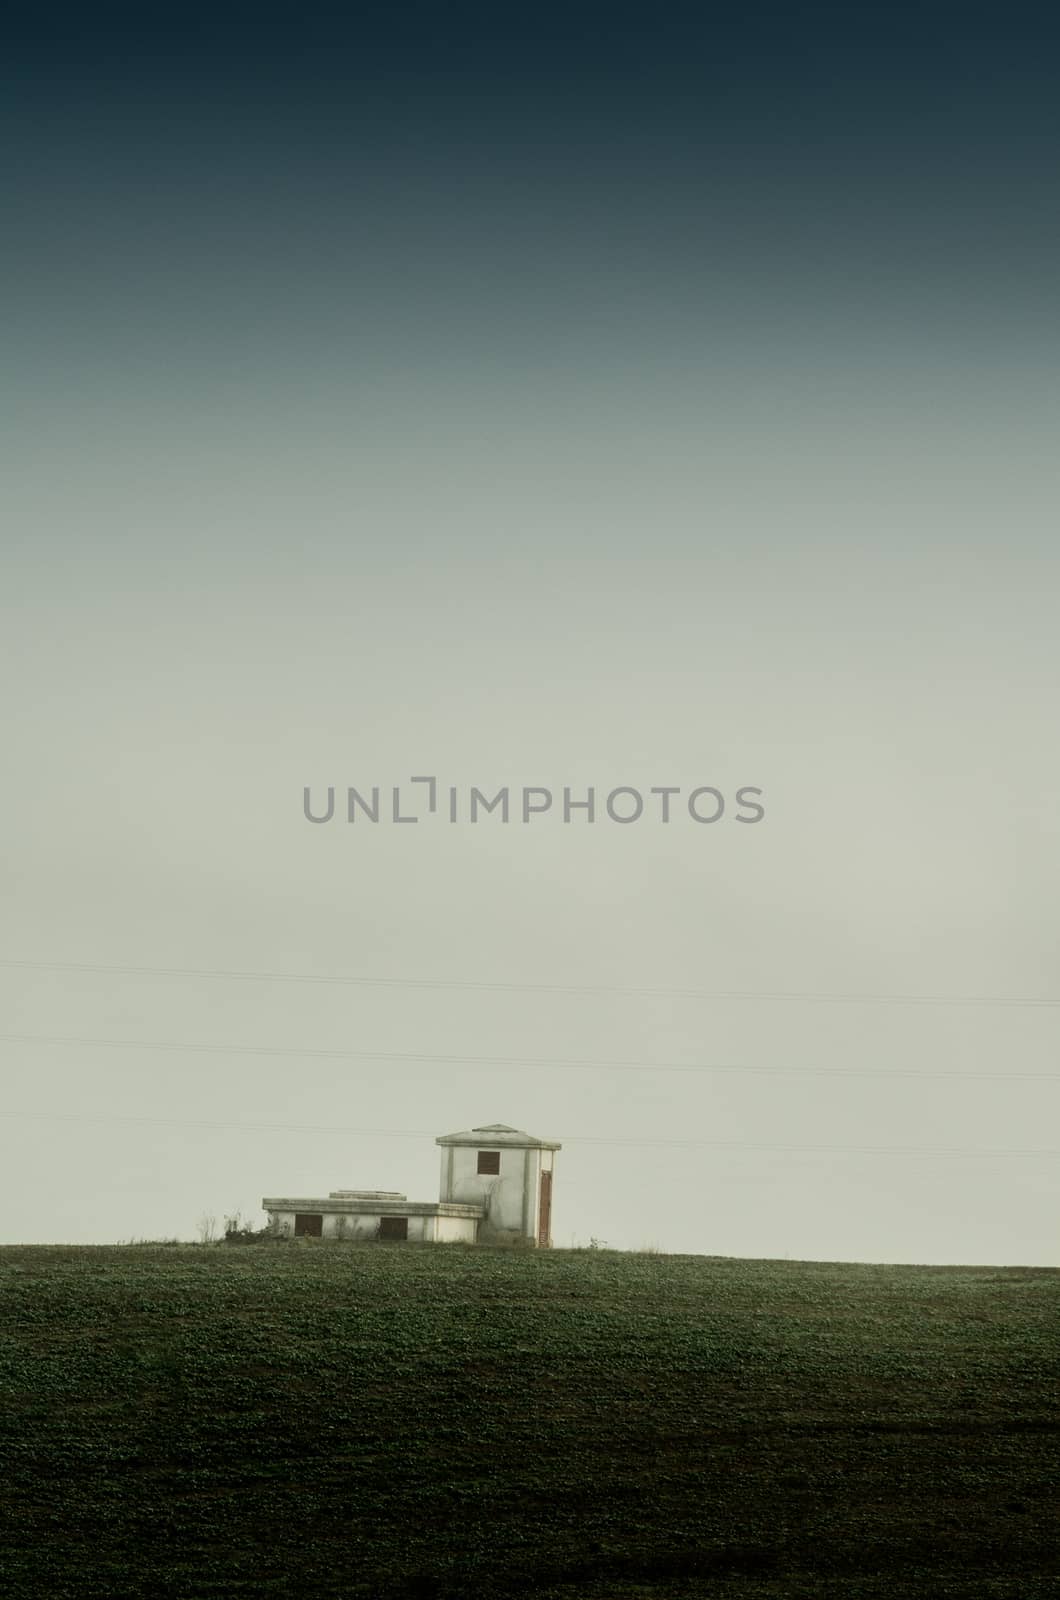 There is this small building on a field in Badostain, Navarra, where the empty sky closes a peaceful atmosphere